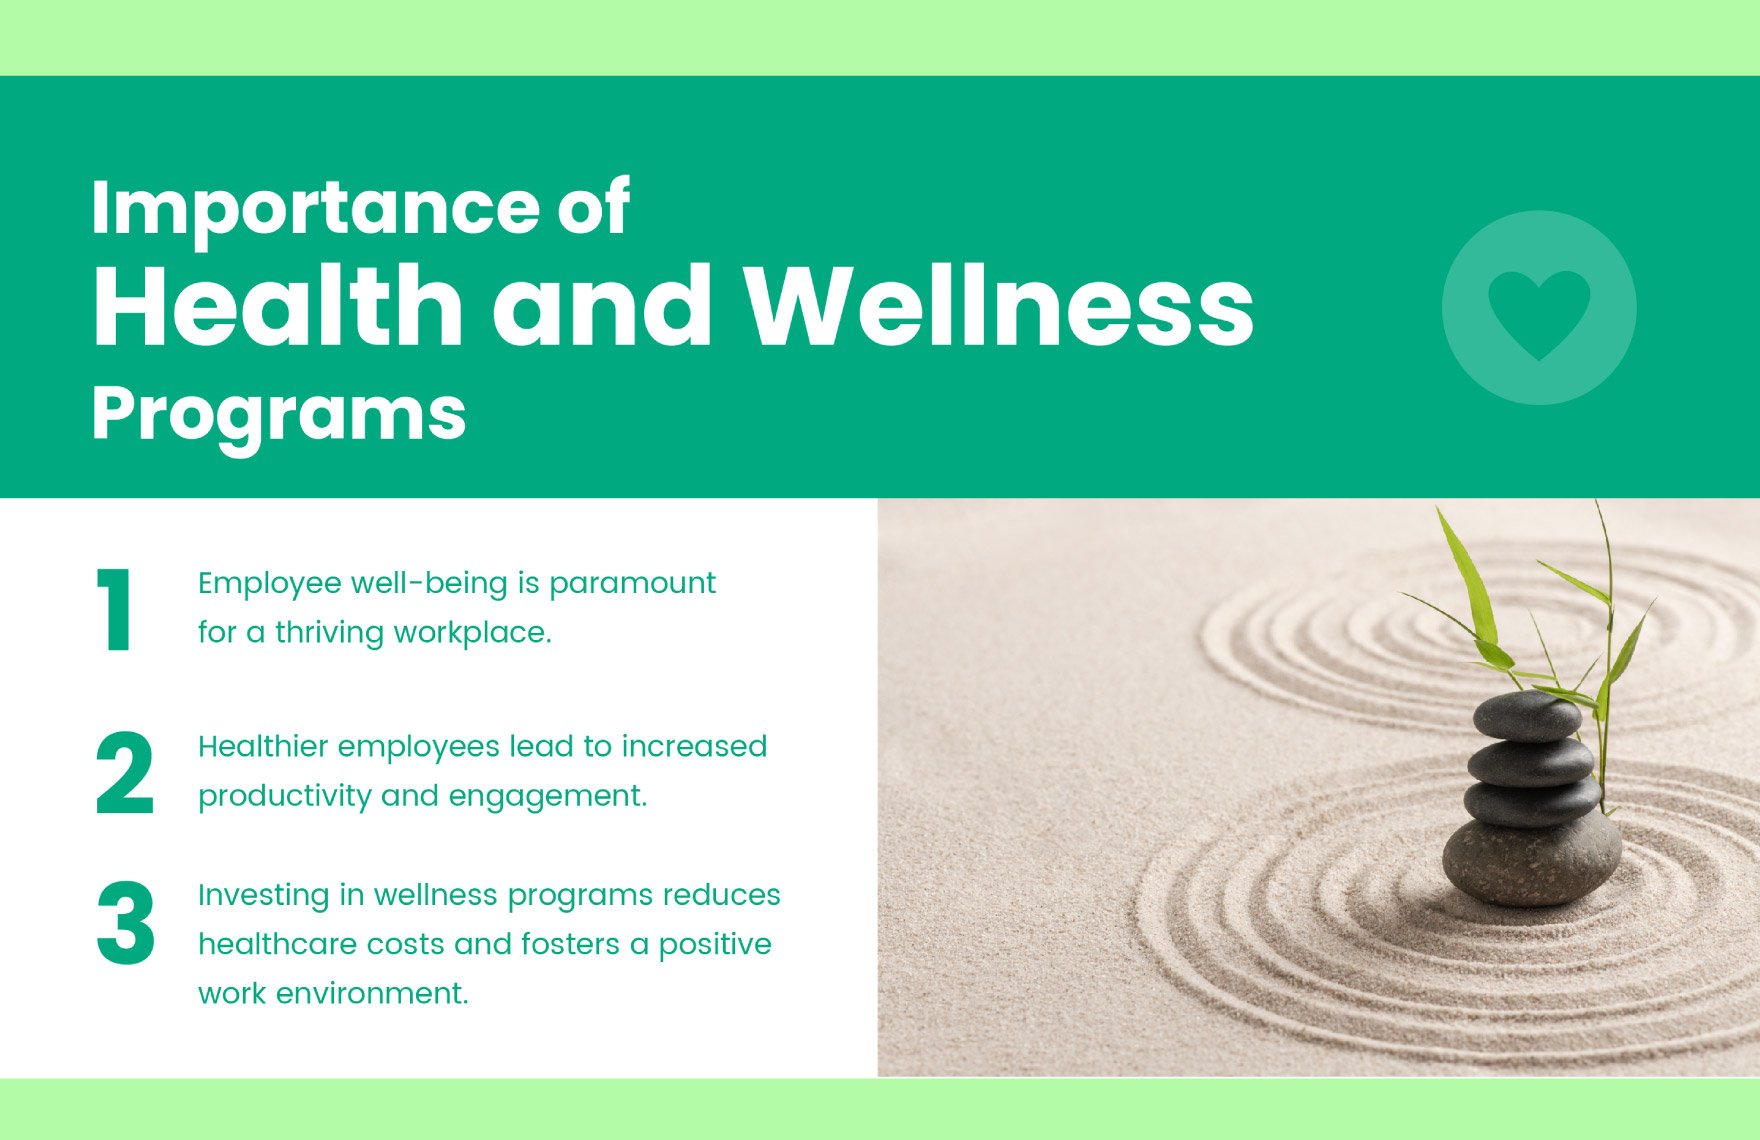 Health and Wellness Programs Overview Presentation Template